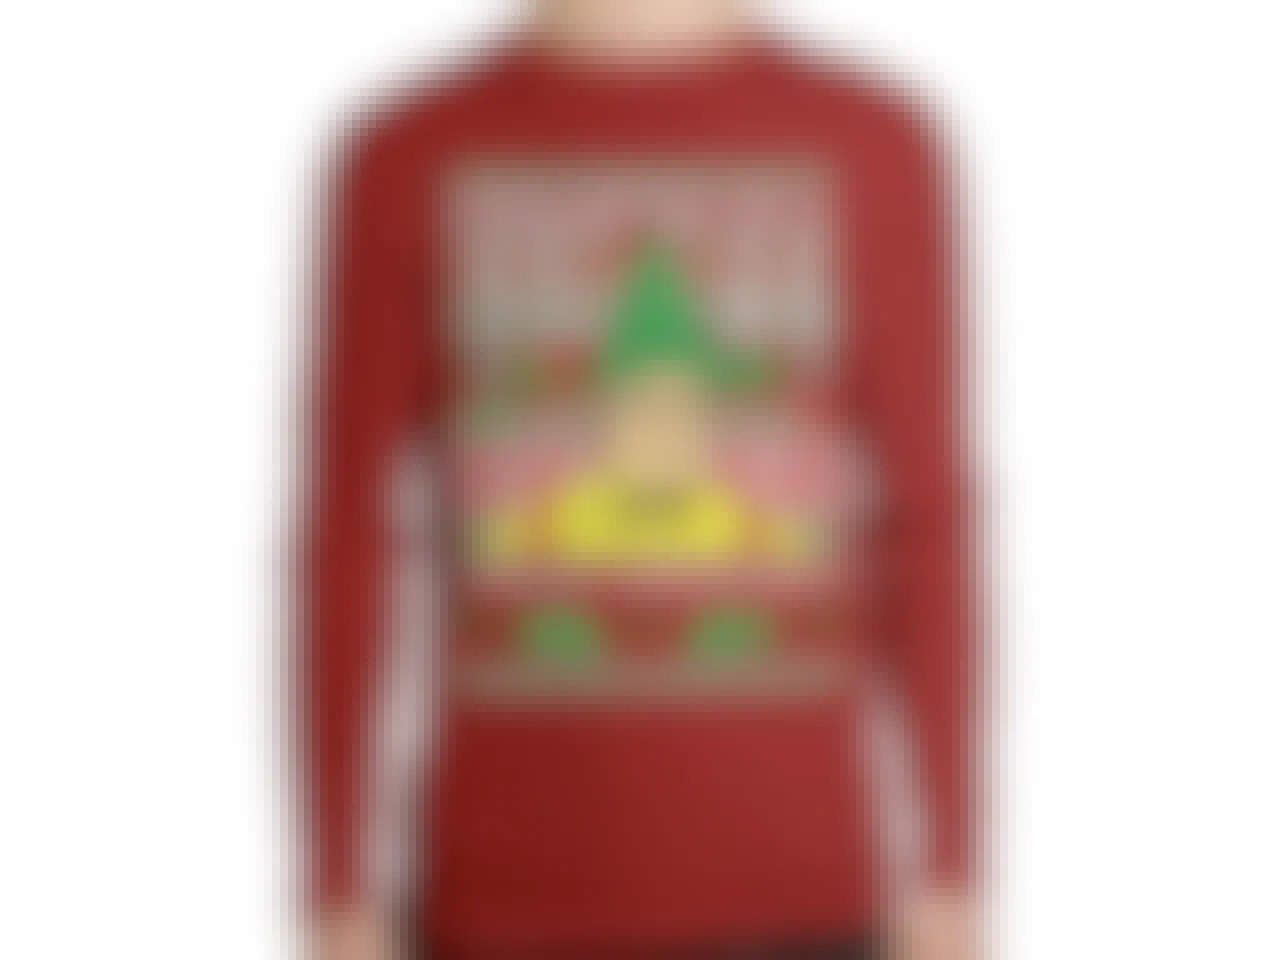 Dwight from The Office ugly Christmas sweater